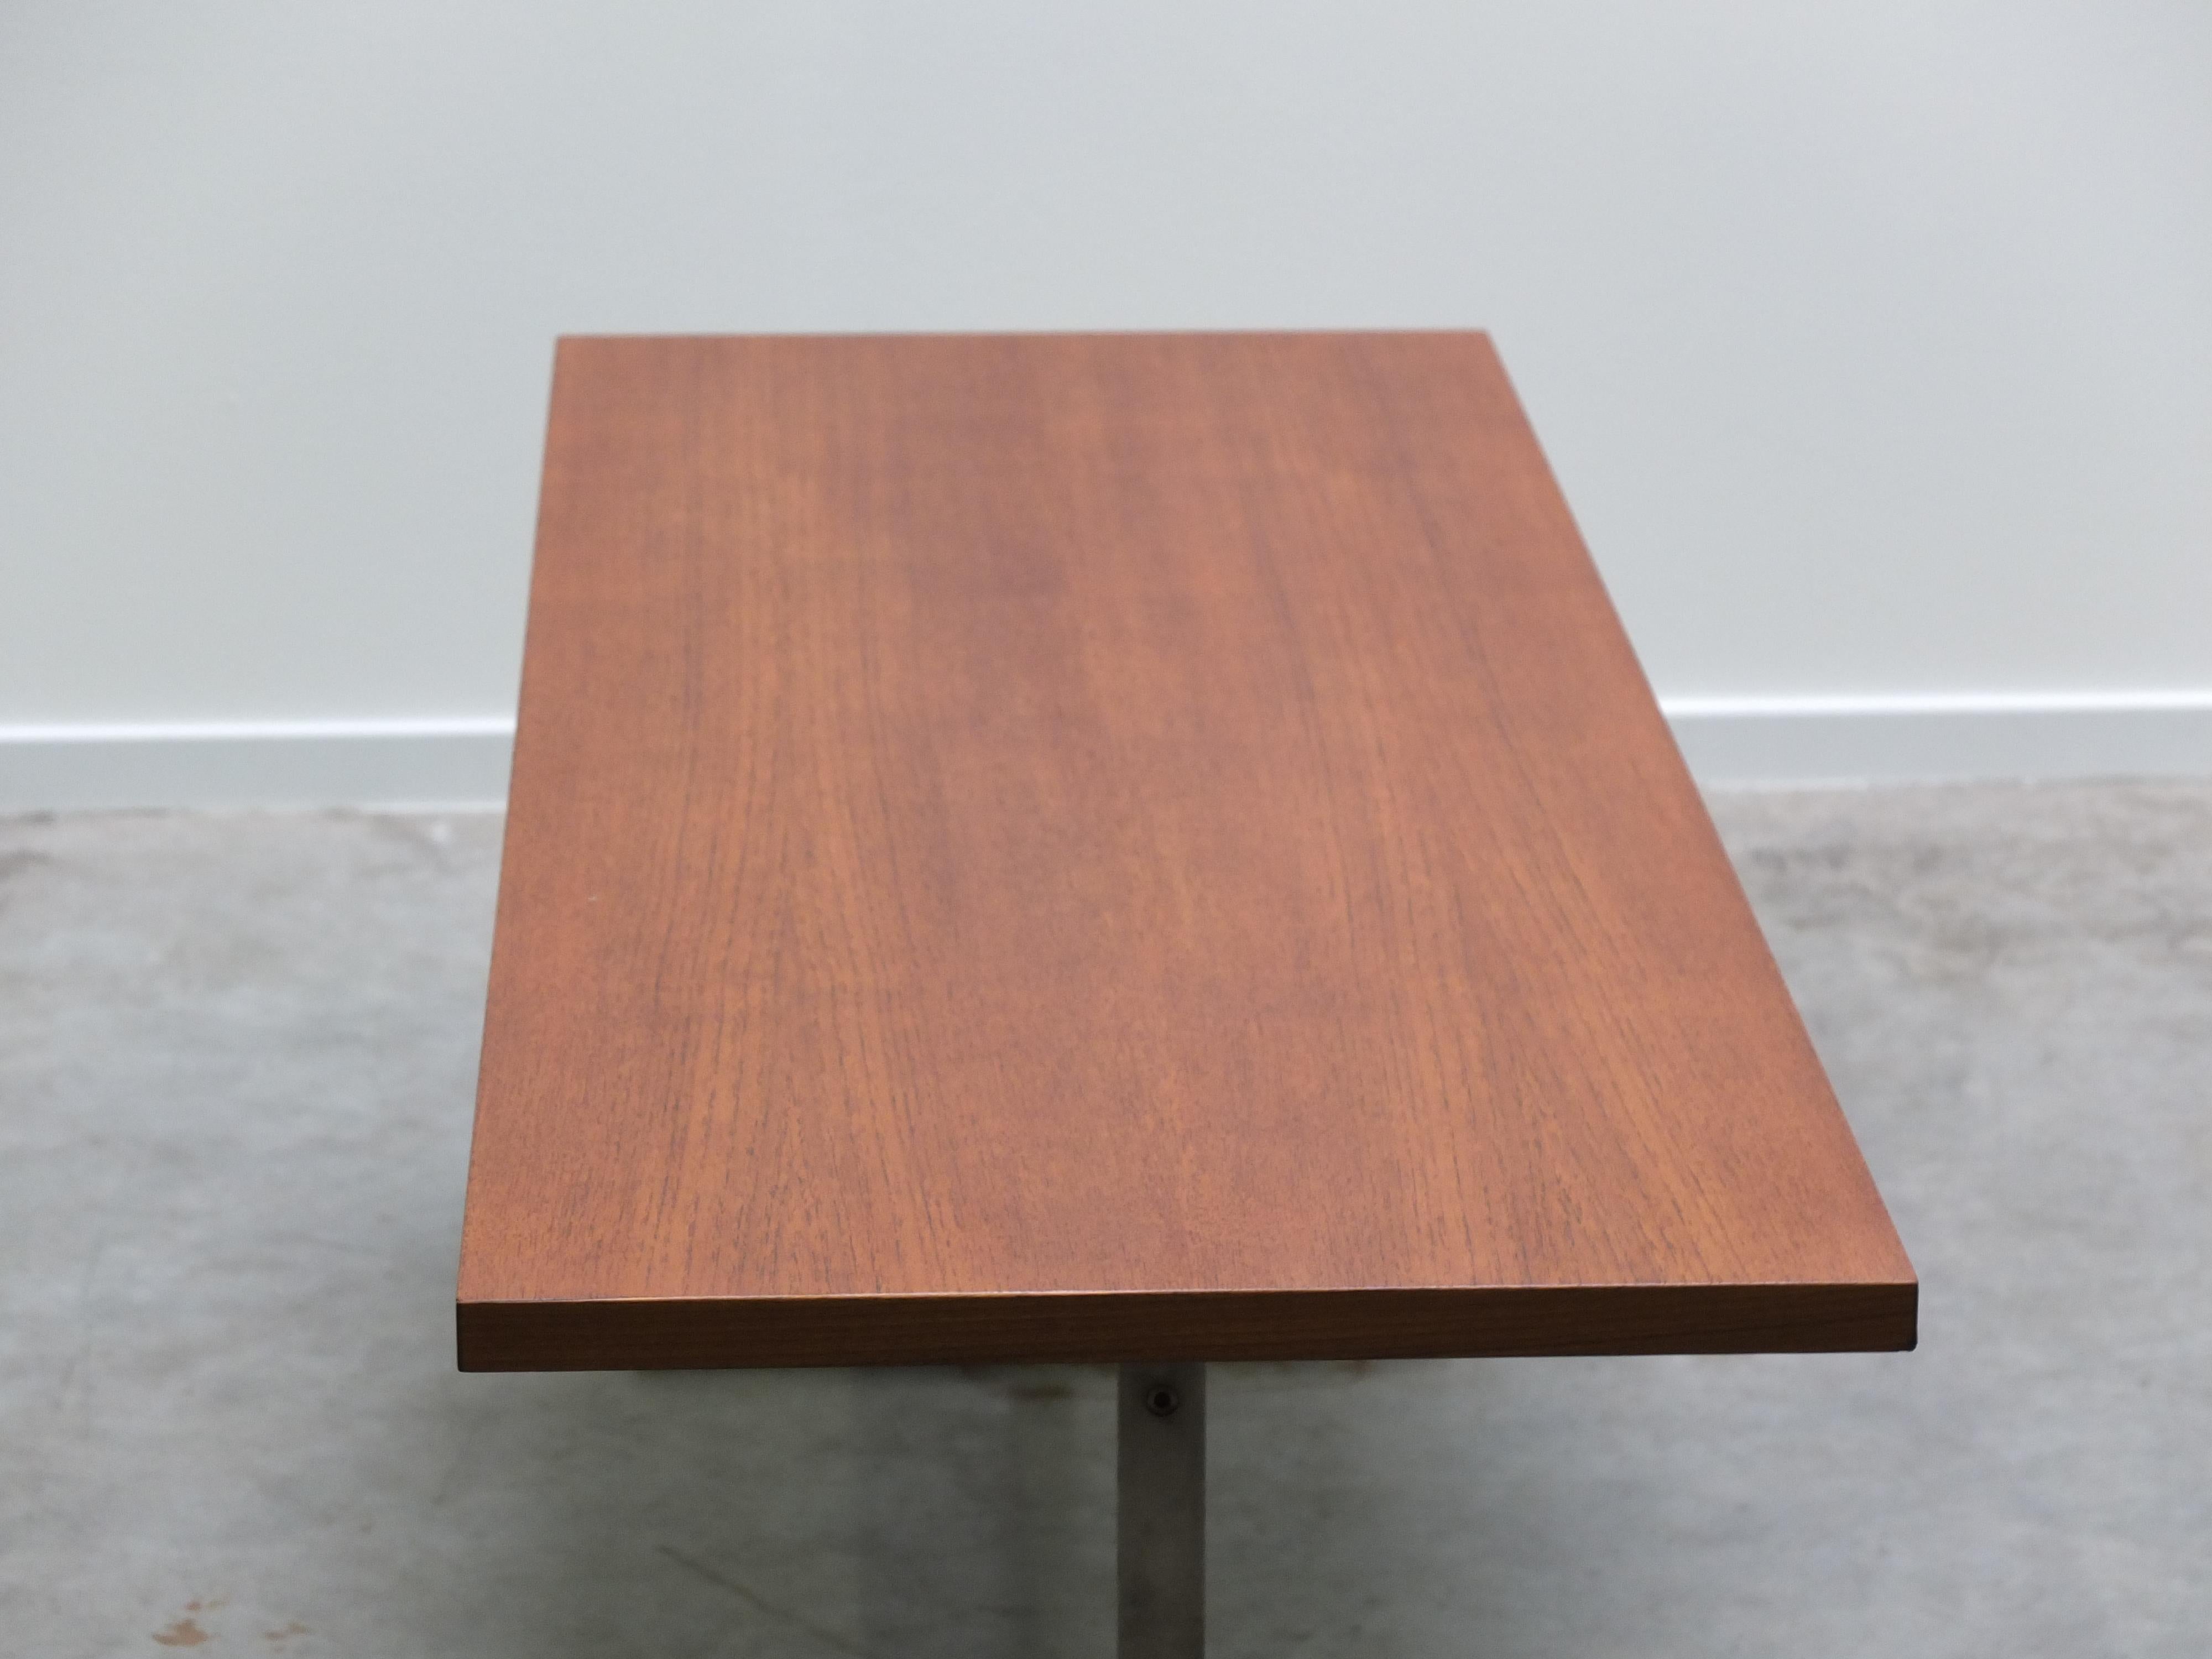 Large Modernist Teak Coffee Table in the Style of Arne Jacobsen, 1960s For Sale 5